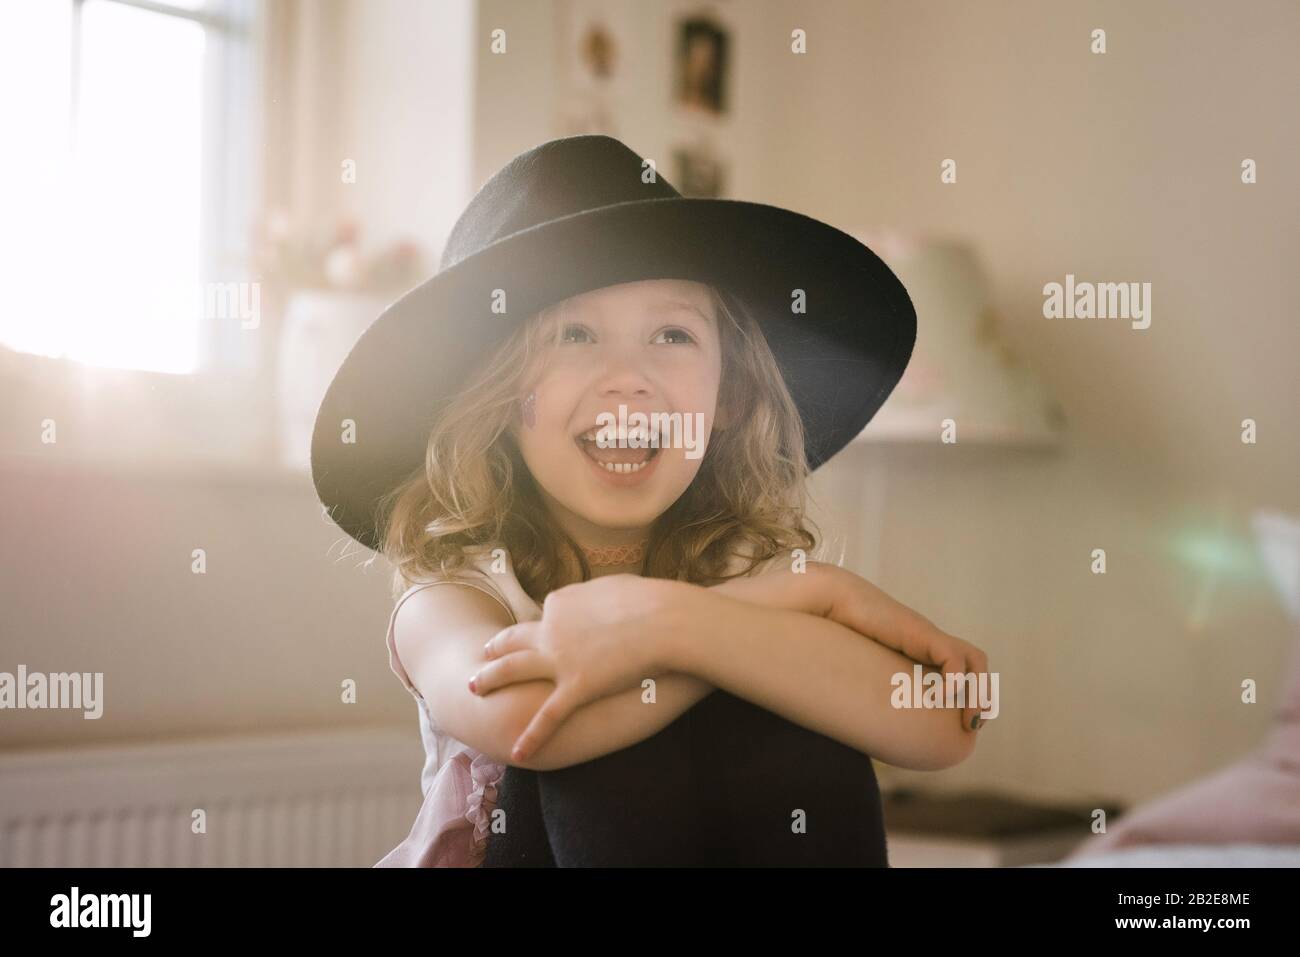 portrait of a young girl laughing wither face painted and fancy dress Stock Photo